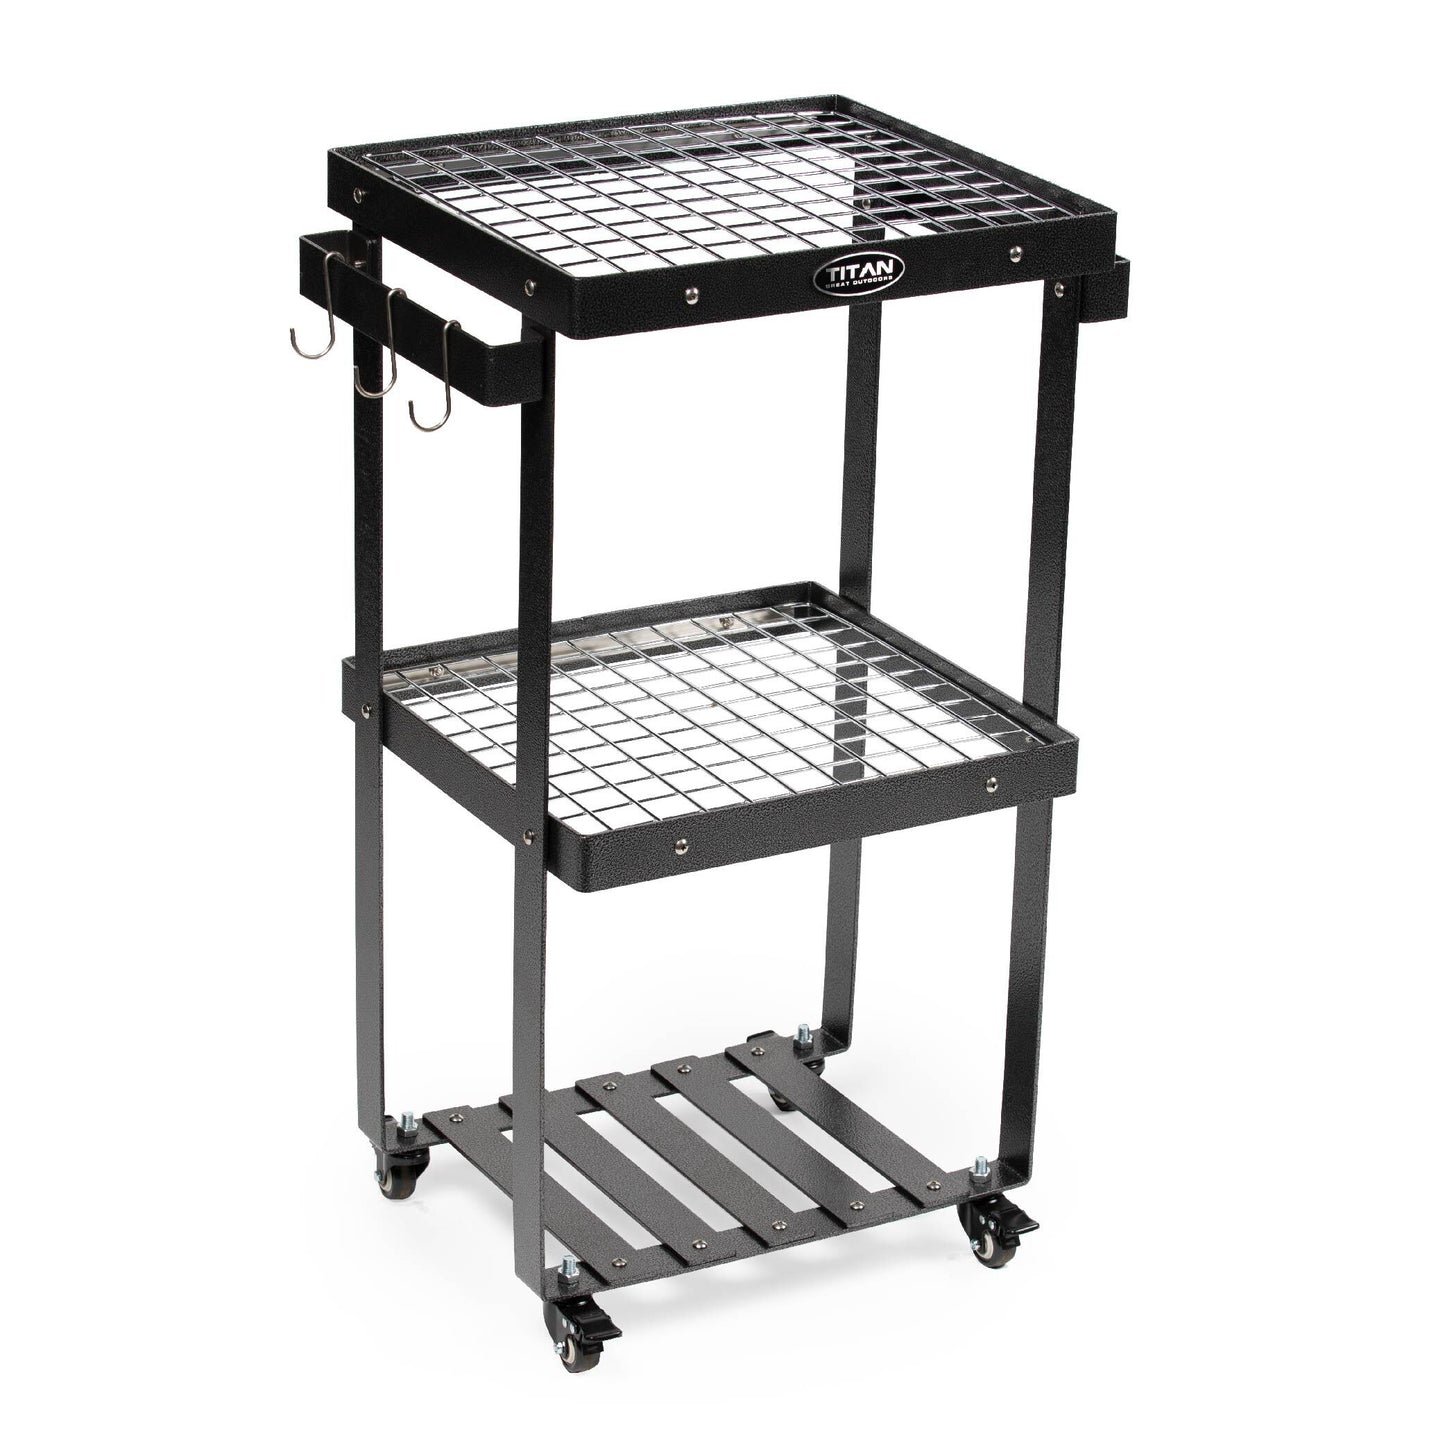 Barbecue Prep Station Grill Accessory Serving Cart - view 1